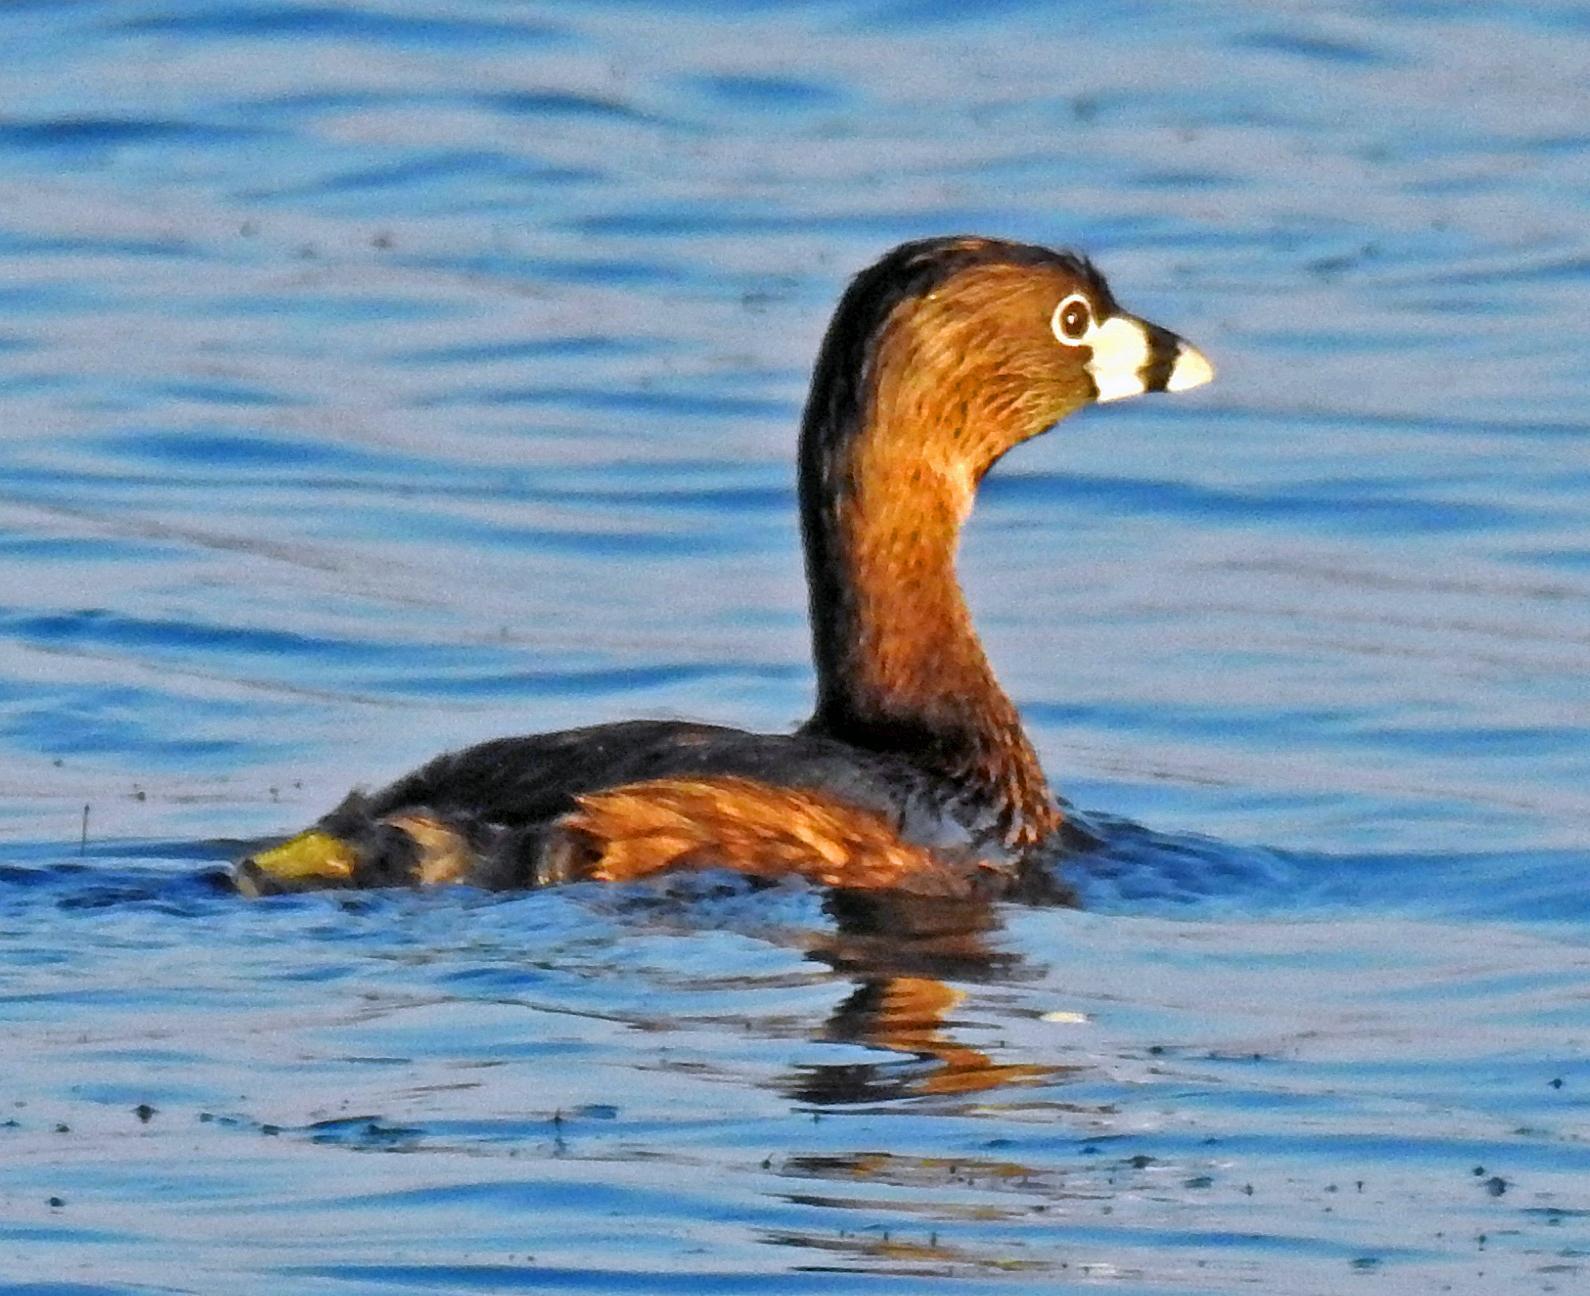 Pied-billed Grebe Photo by Tom Gannon